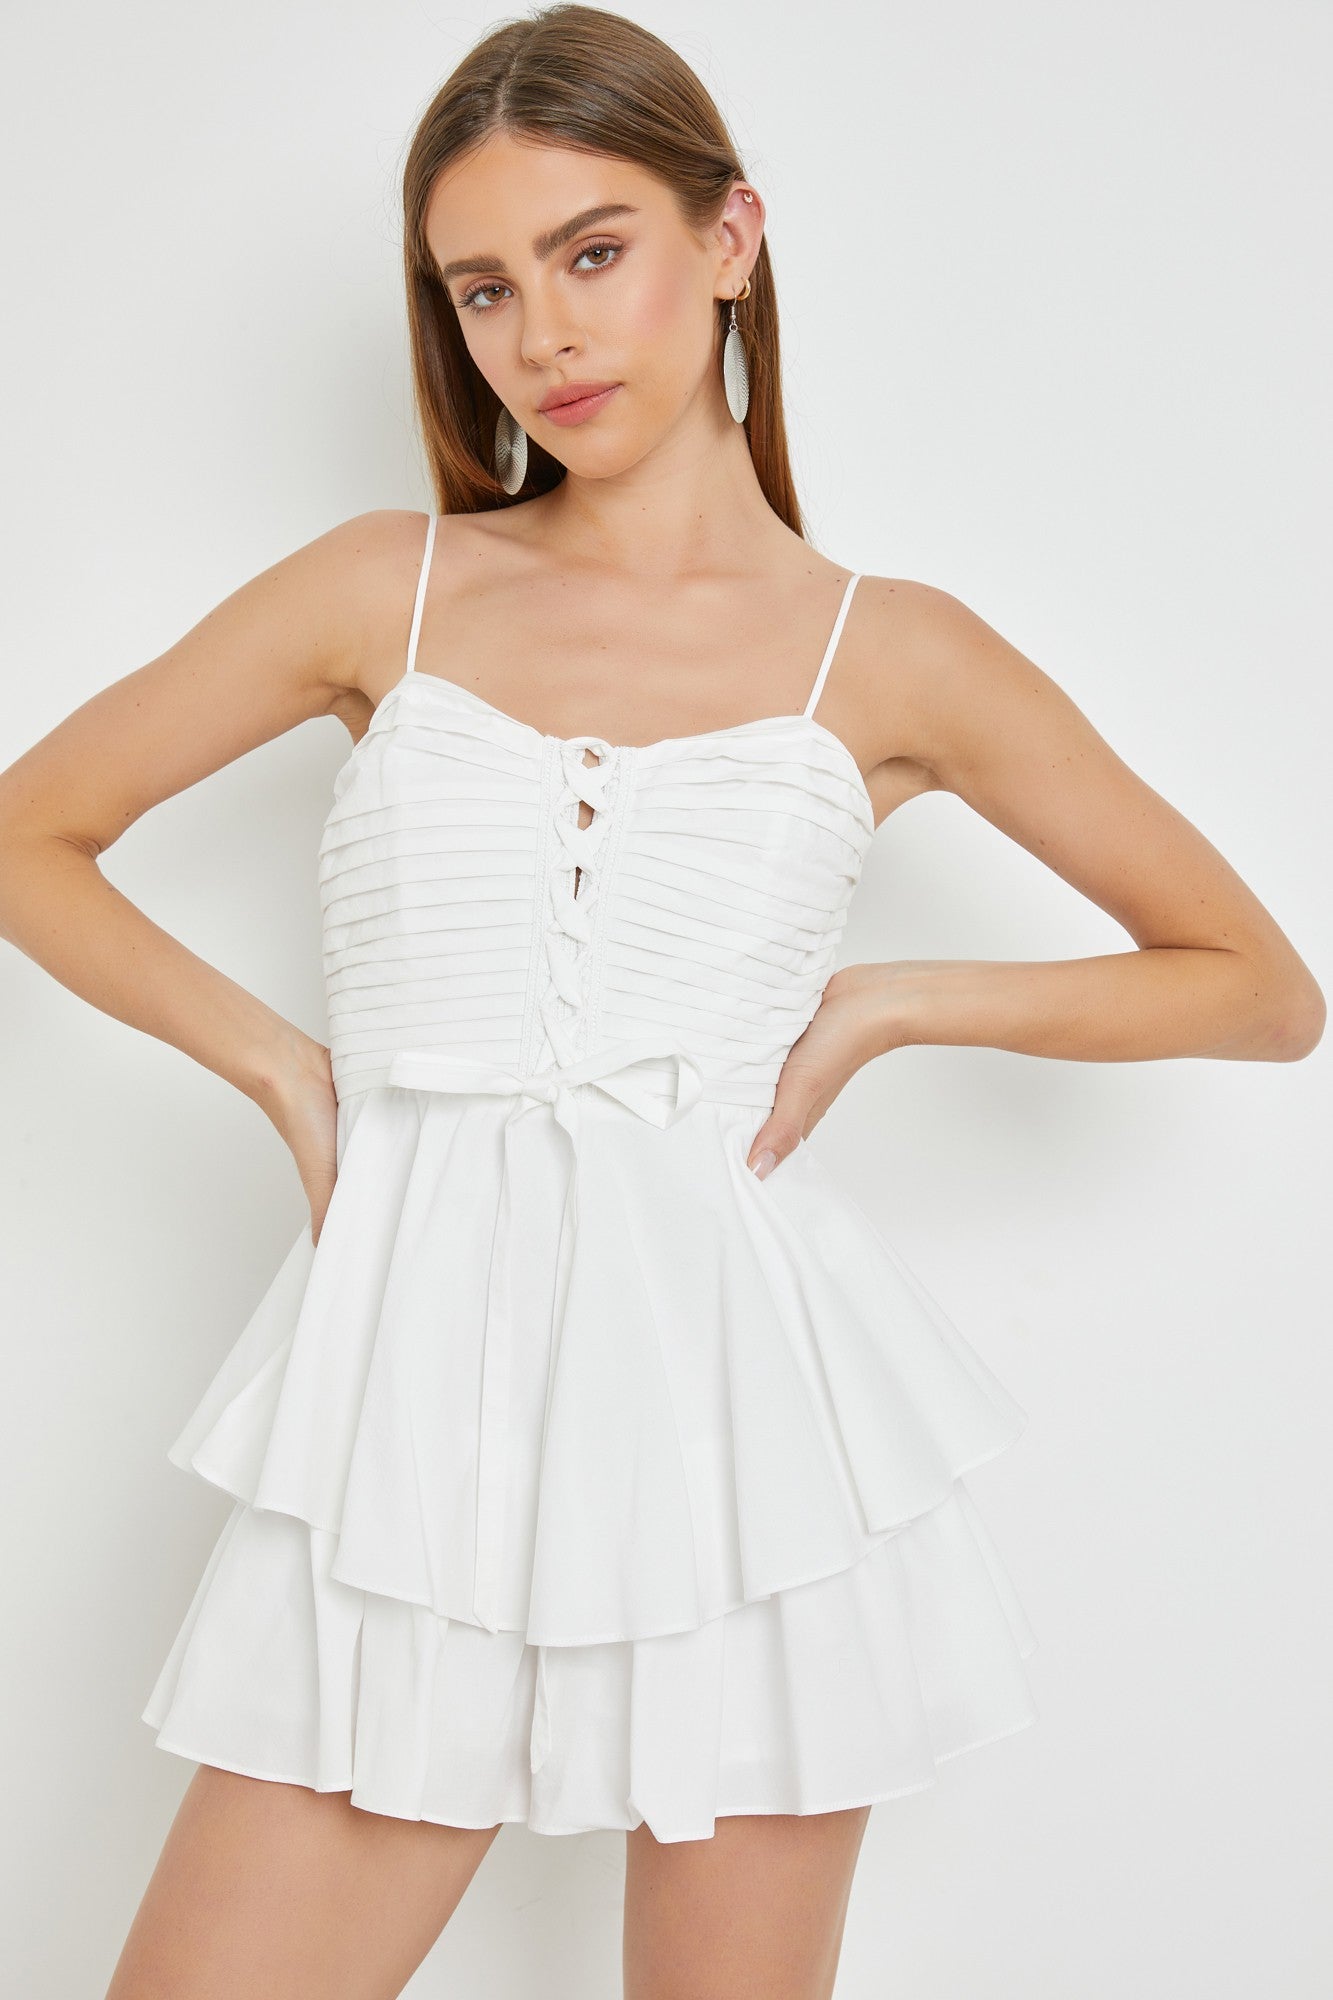 MS White Pleated Bodice Lace Up Romper